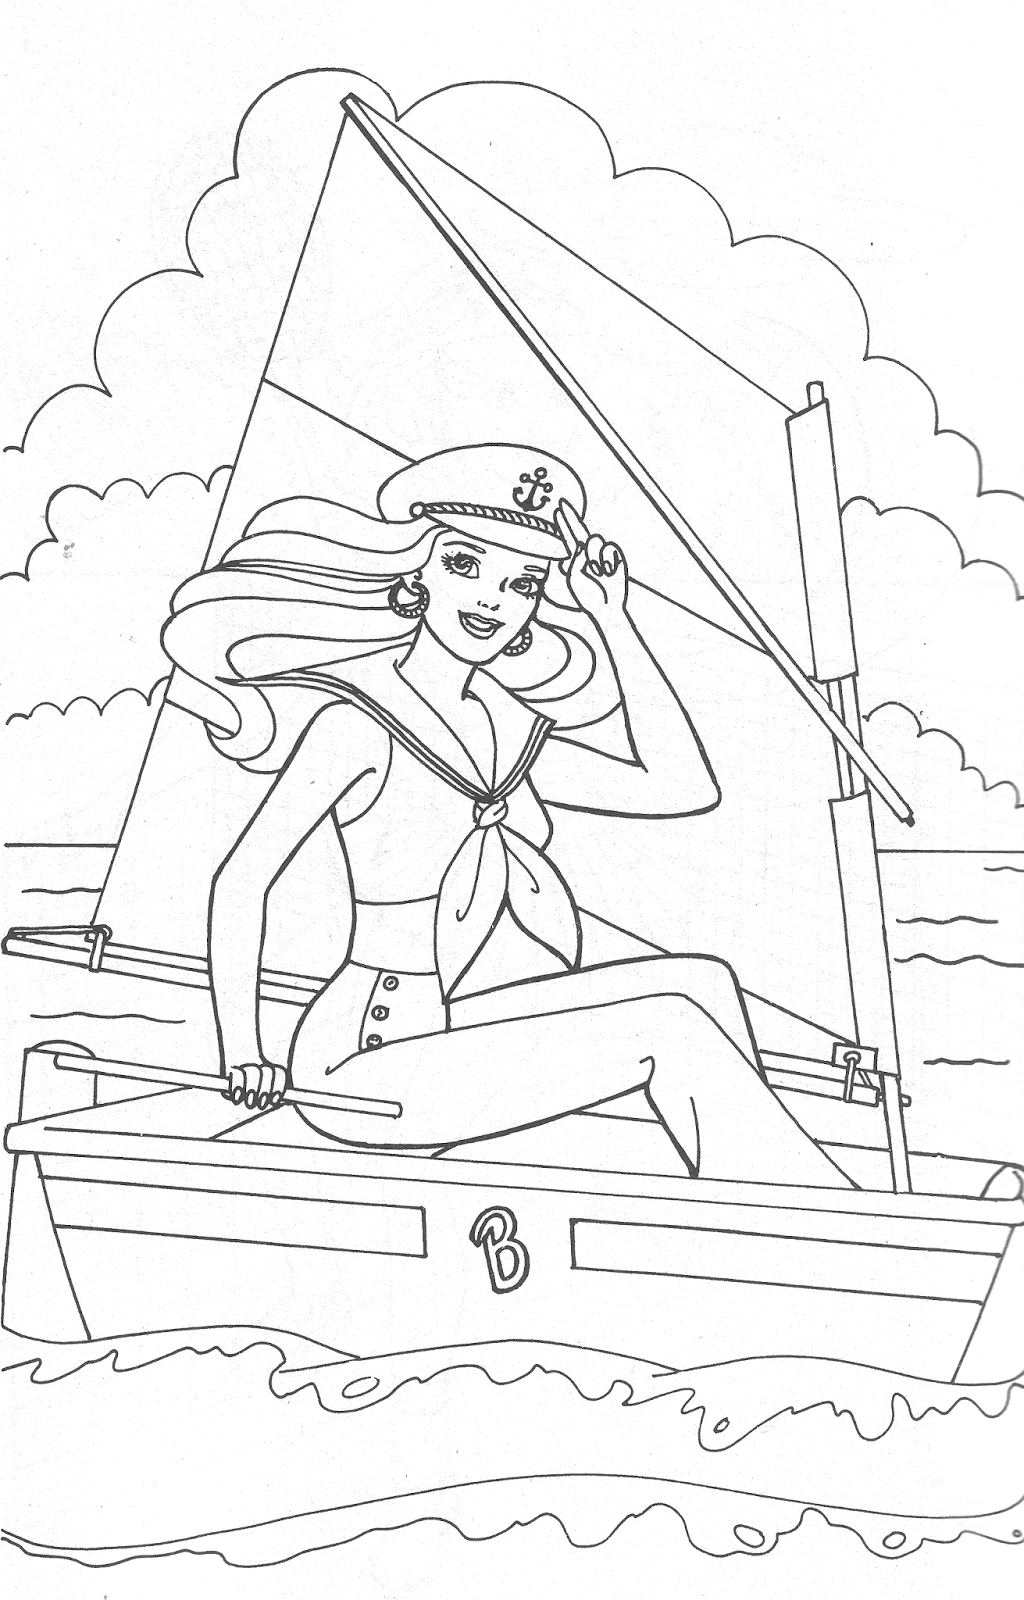 barbie doll pictures to color miss missy paper dolls barbie coloring pages part 1 color doll barbie pictures to 